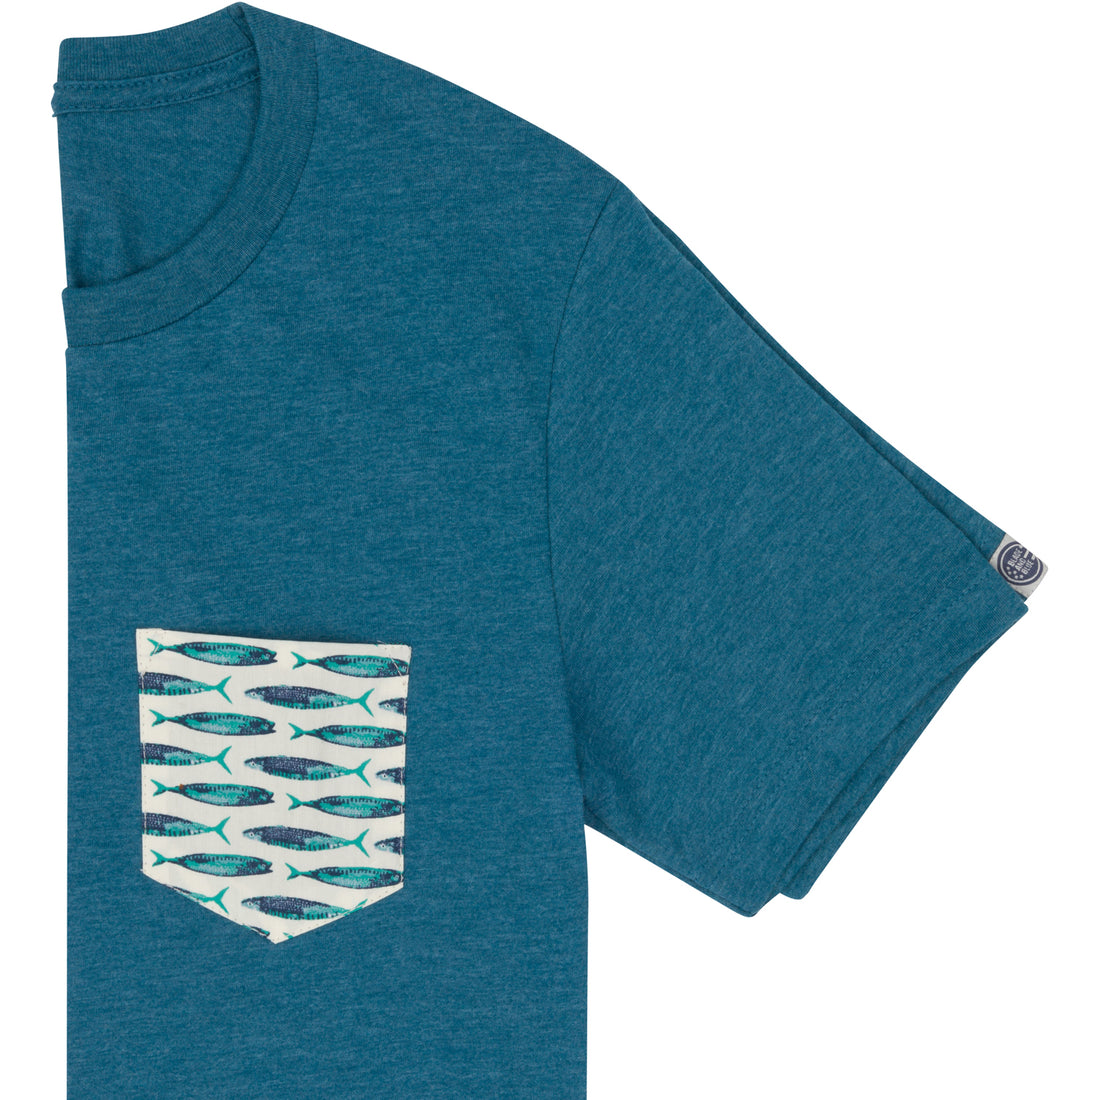 Teal Blue With Summer Fish Print Pocket Tee